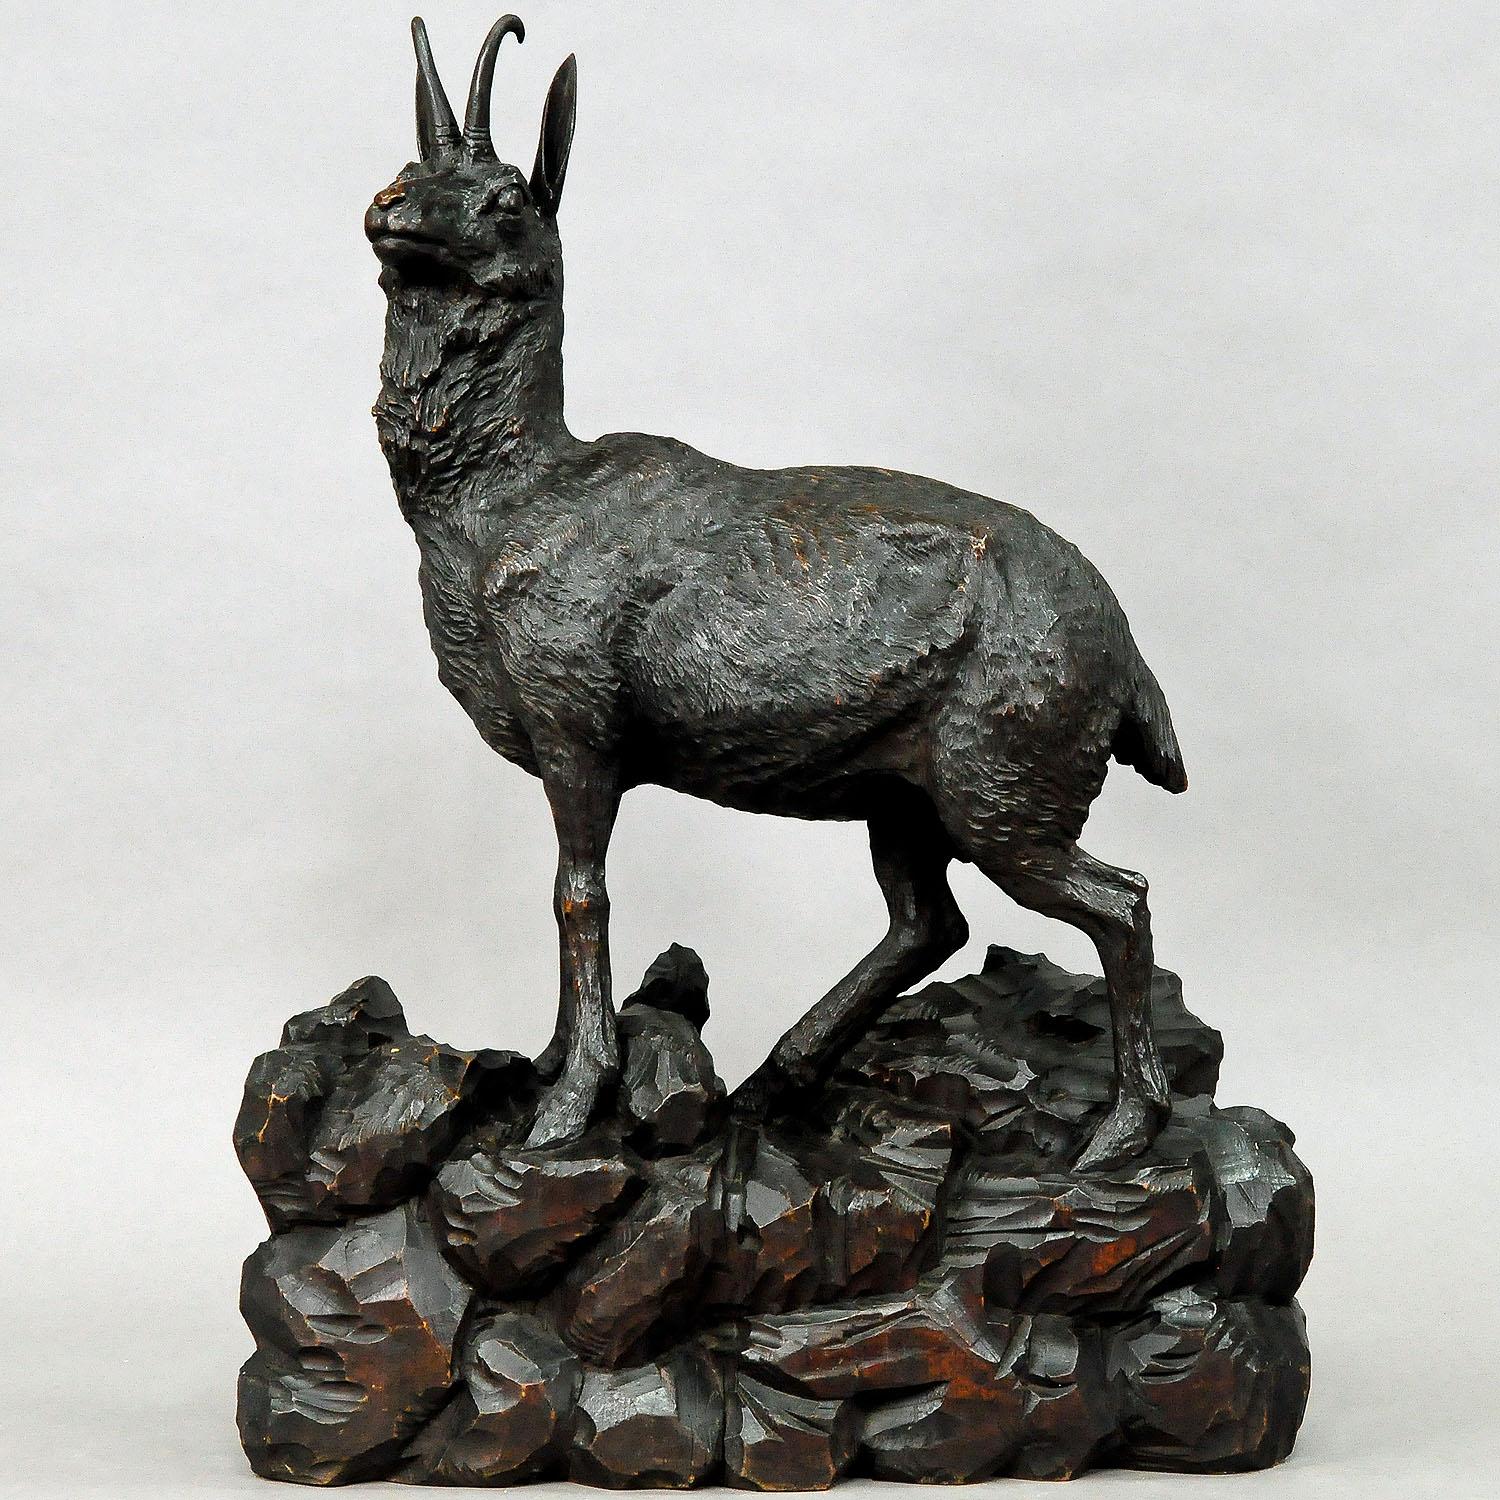 An expressive naturalistic carved large chamois sculpture standing on a rocky base. It is handcarved and stainied lindenwood. Executed in Austria around 1900.

Measures: Length 17.72